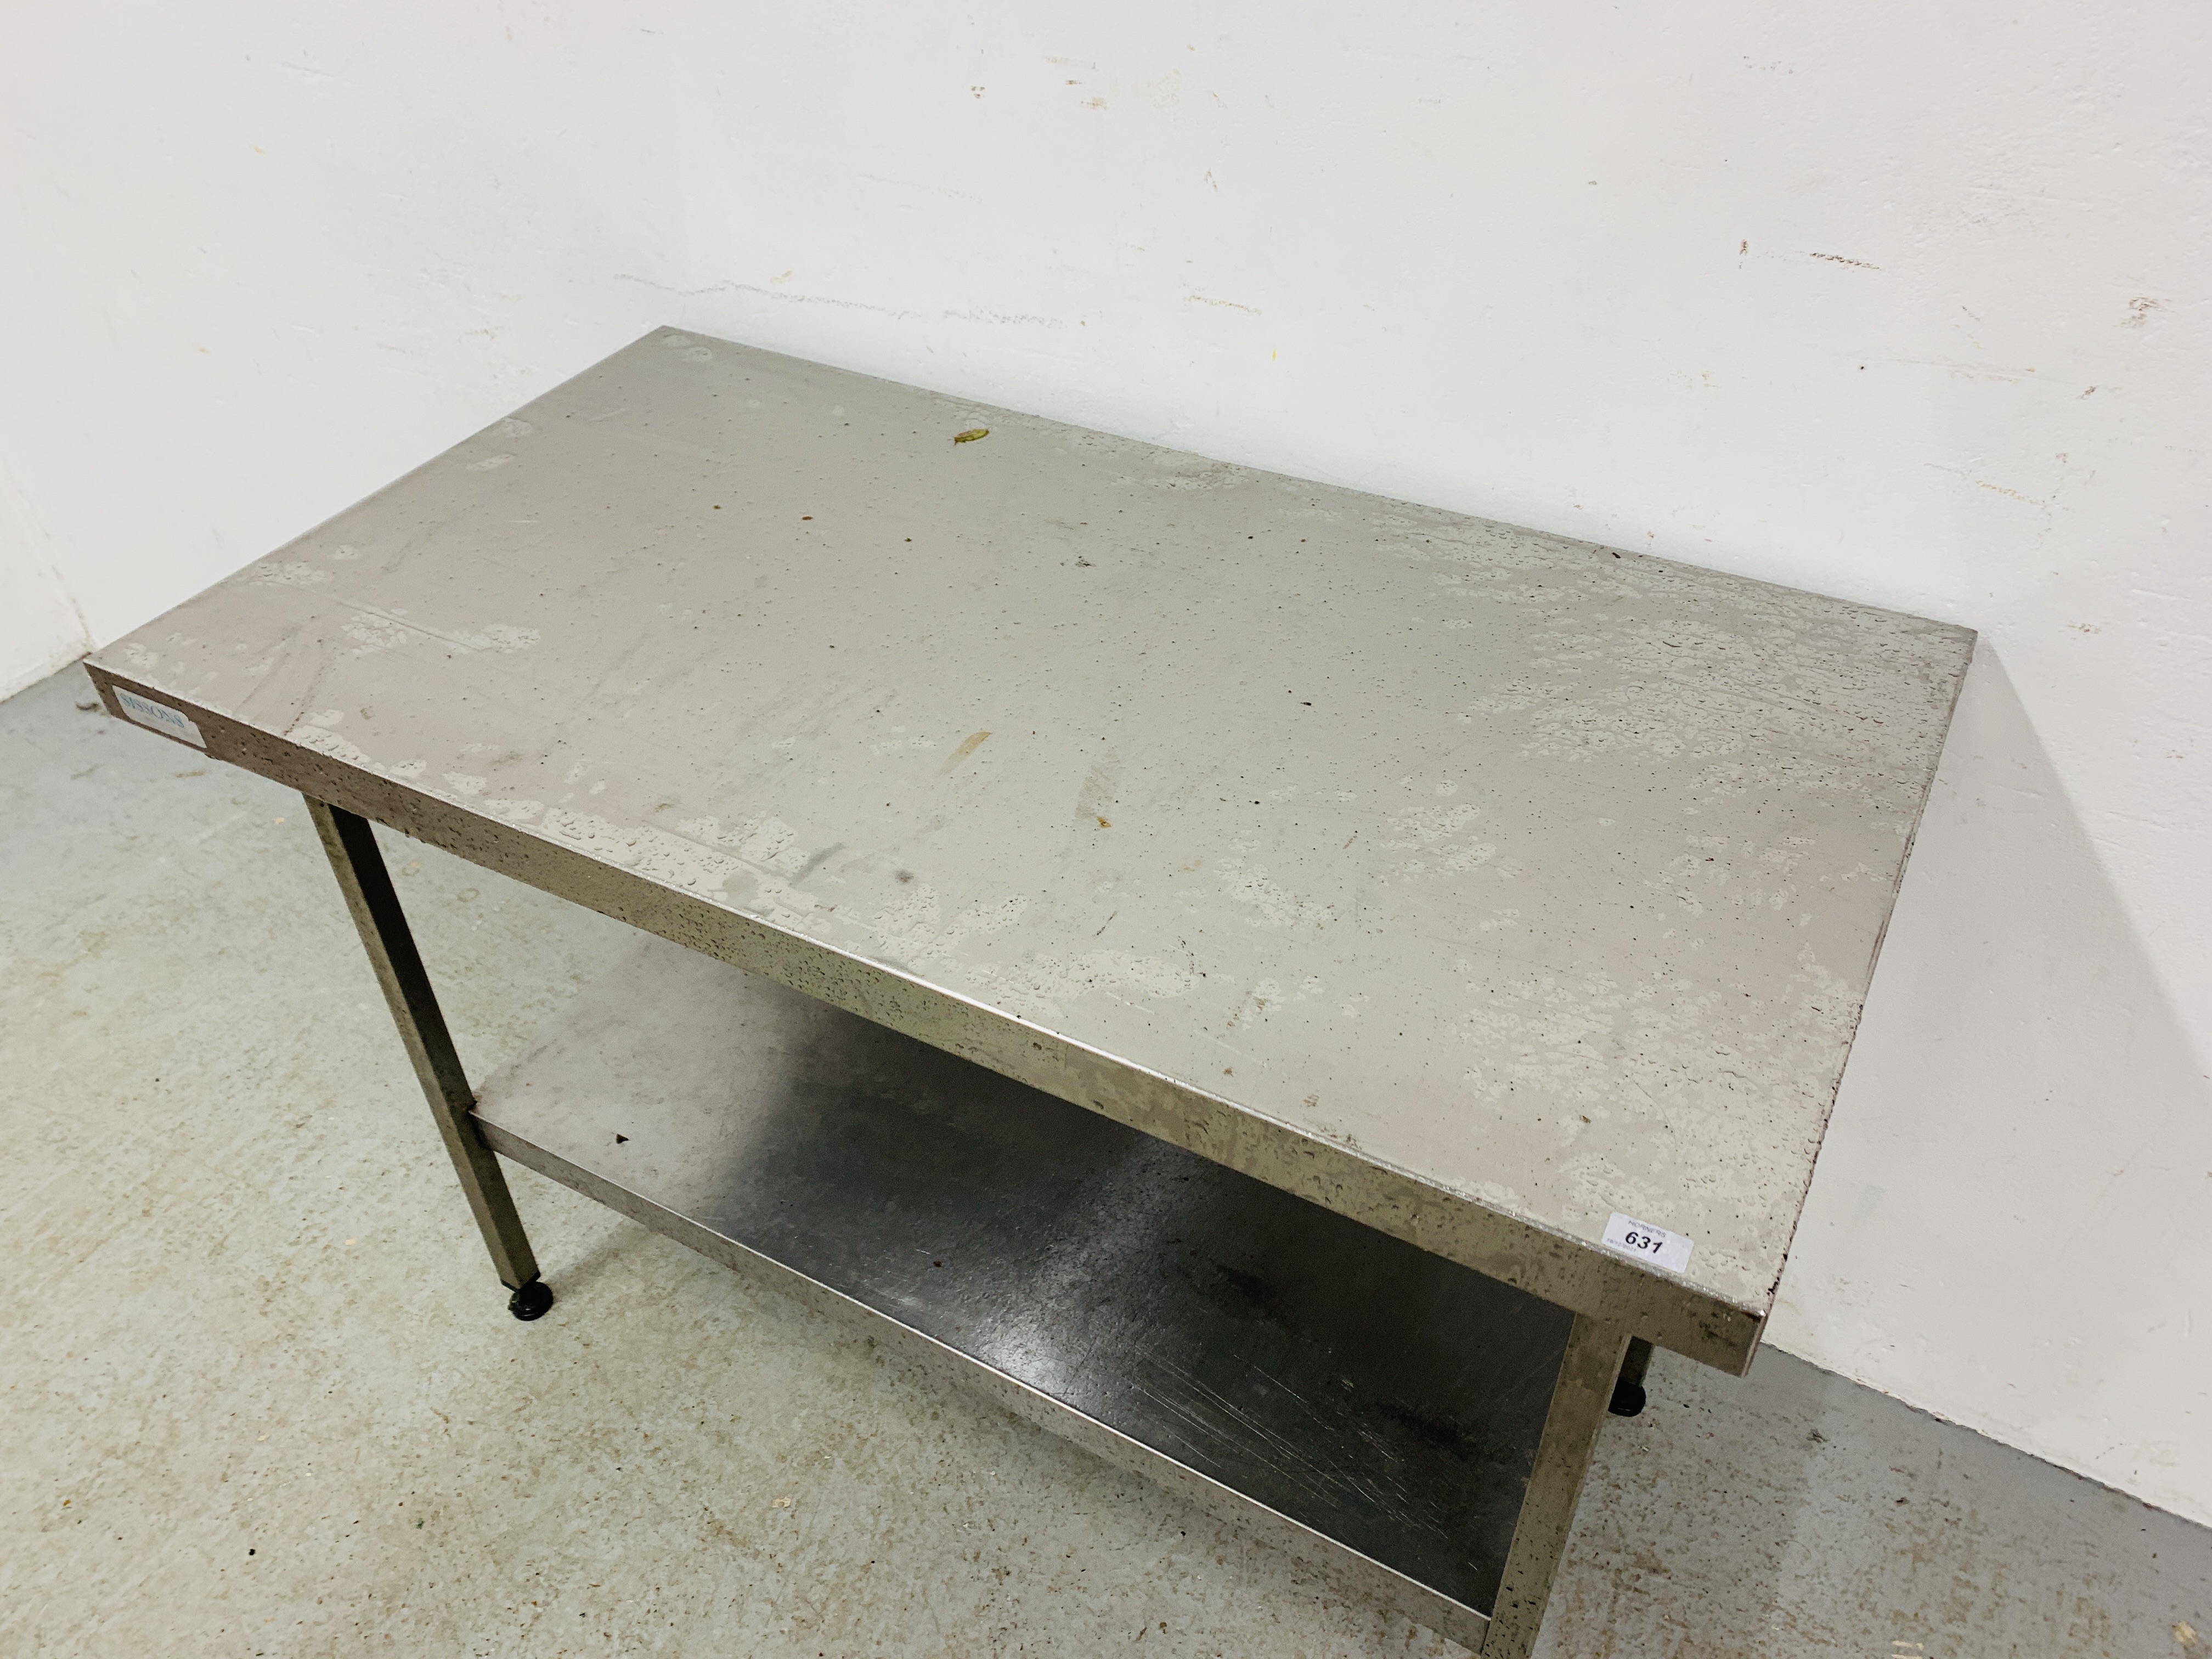 A SISSONS STAINLESS STEEEL 2 TIER PREPARATION TABLE W - 120CM X D - 65 CM. - Image 3 of 5